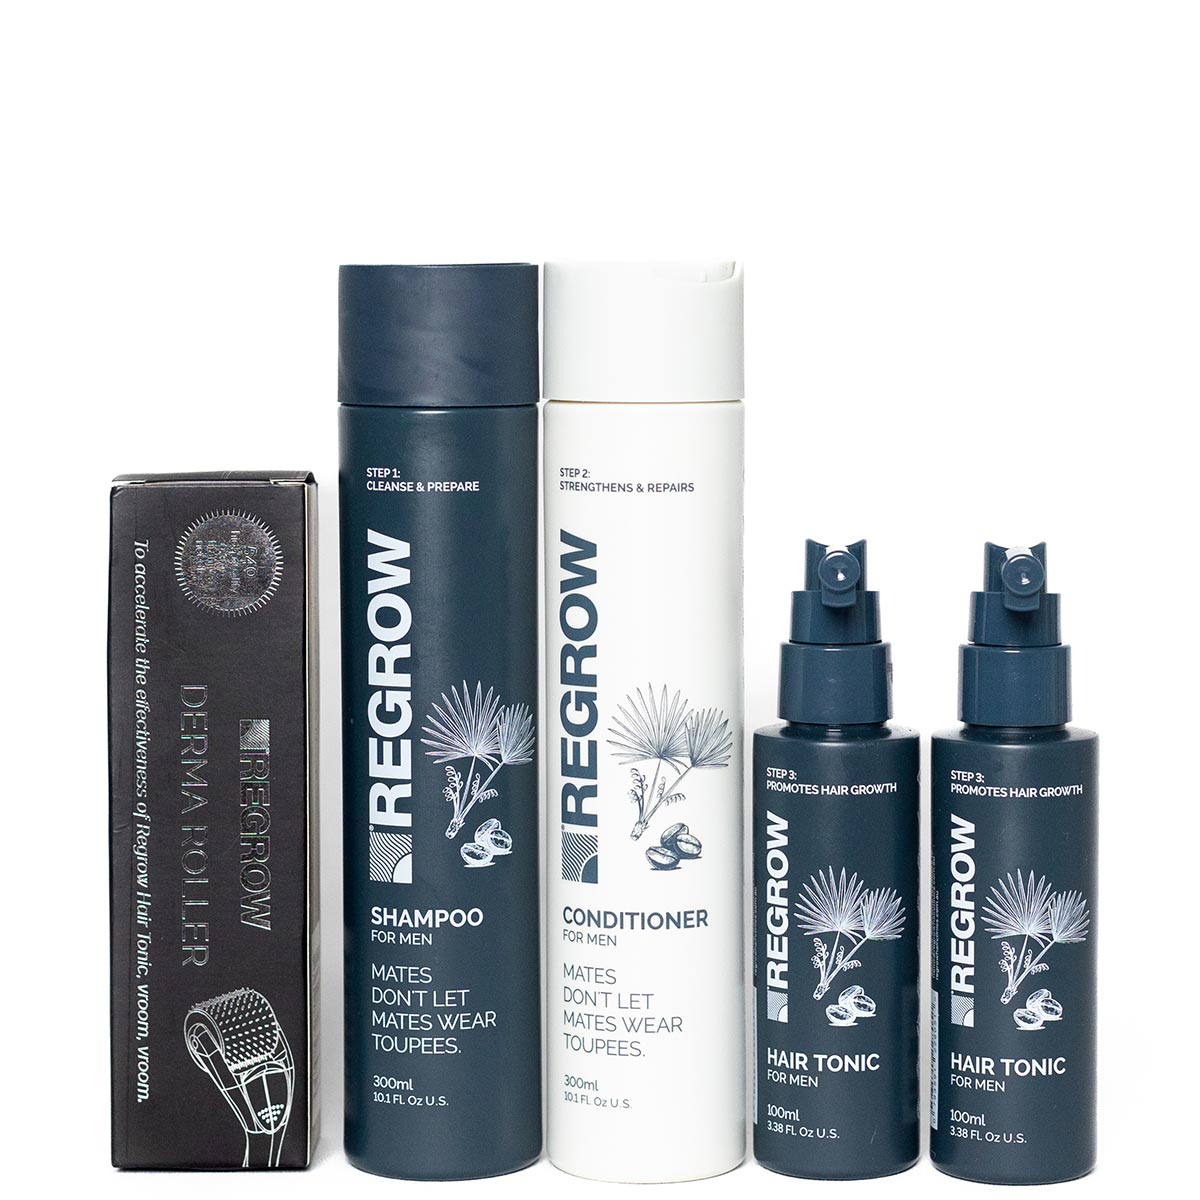 Regrow Men's Extra Tonic 3 Month Hair Growth Pack - Shampoo, Conditioner, Hair Tonic & Derma Roller